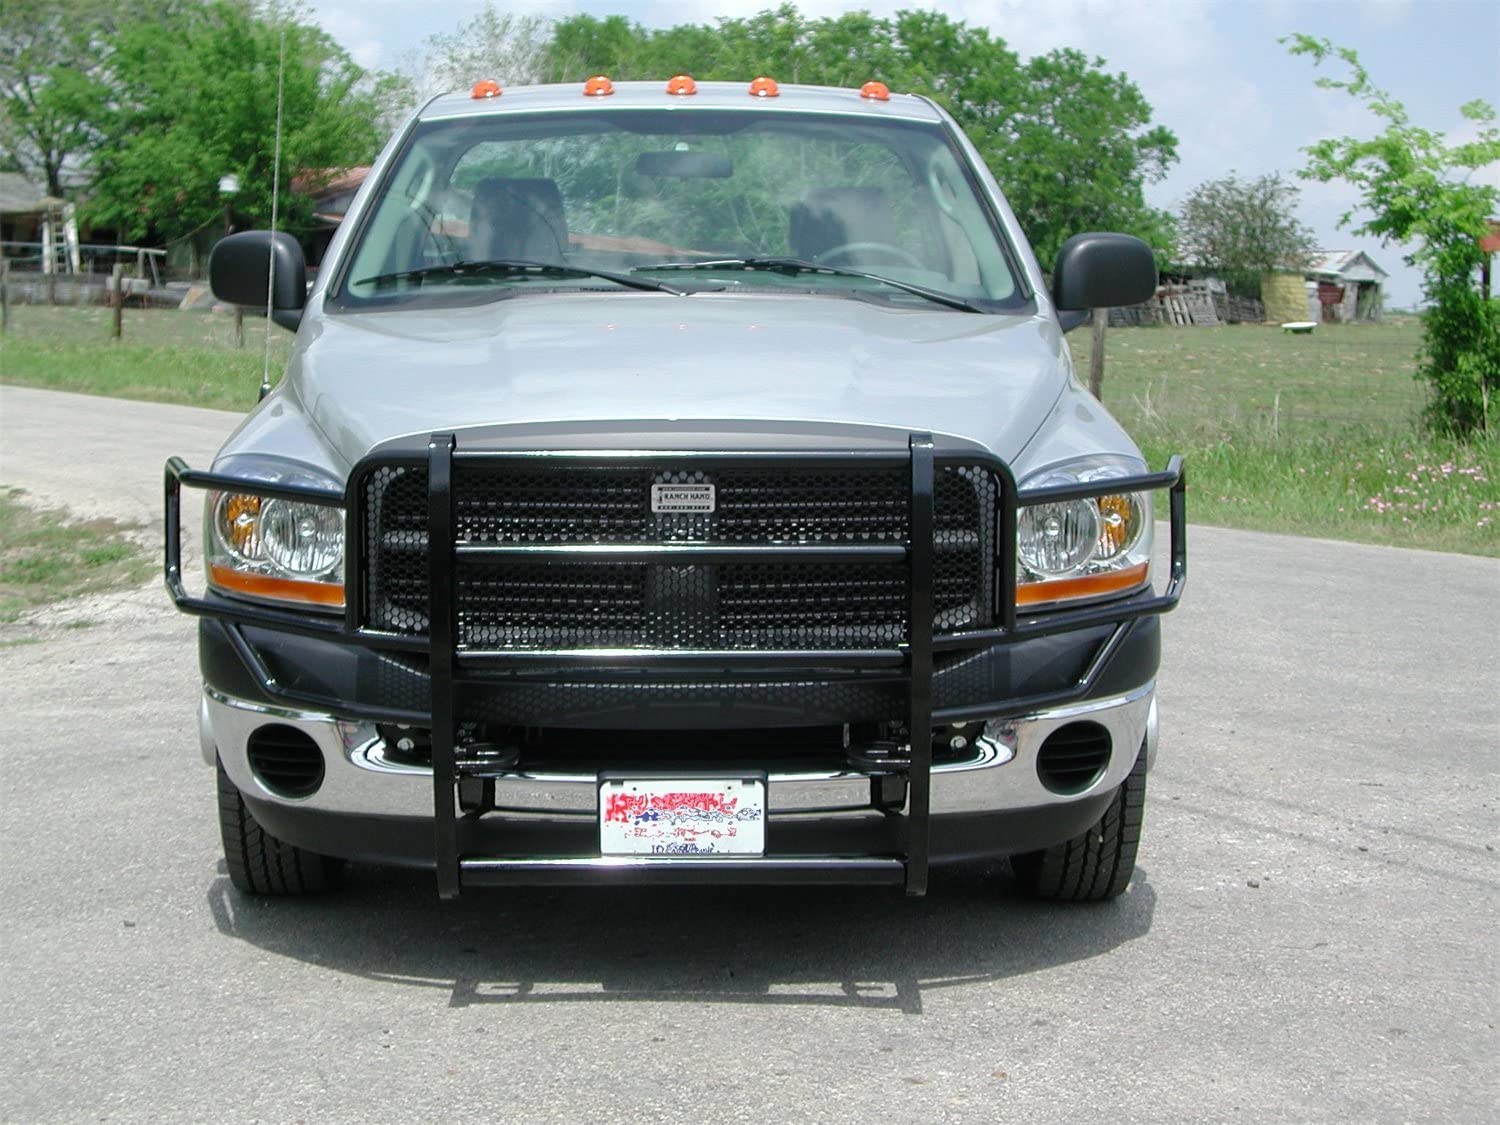 Ranch Hand GGD061BL1 Legend Grille Guard for Dodge RAM HD